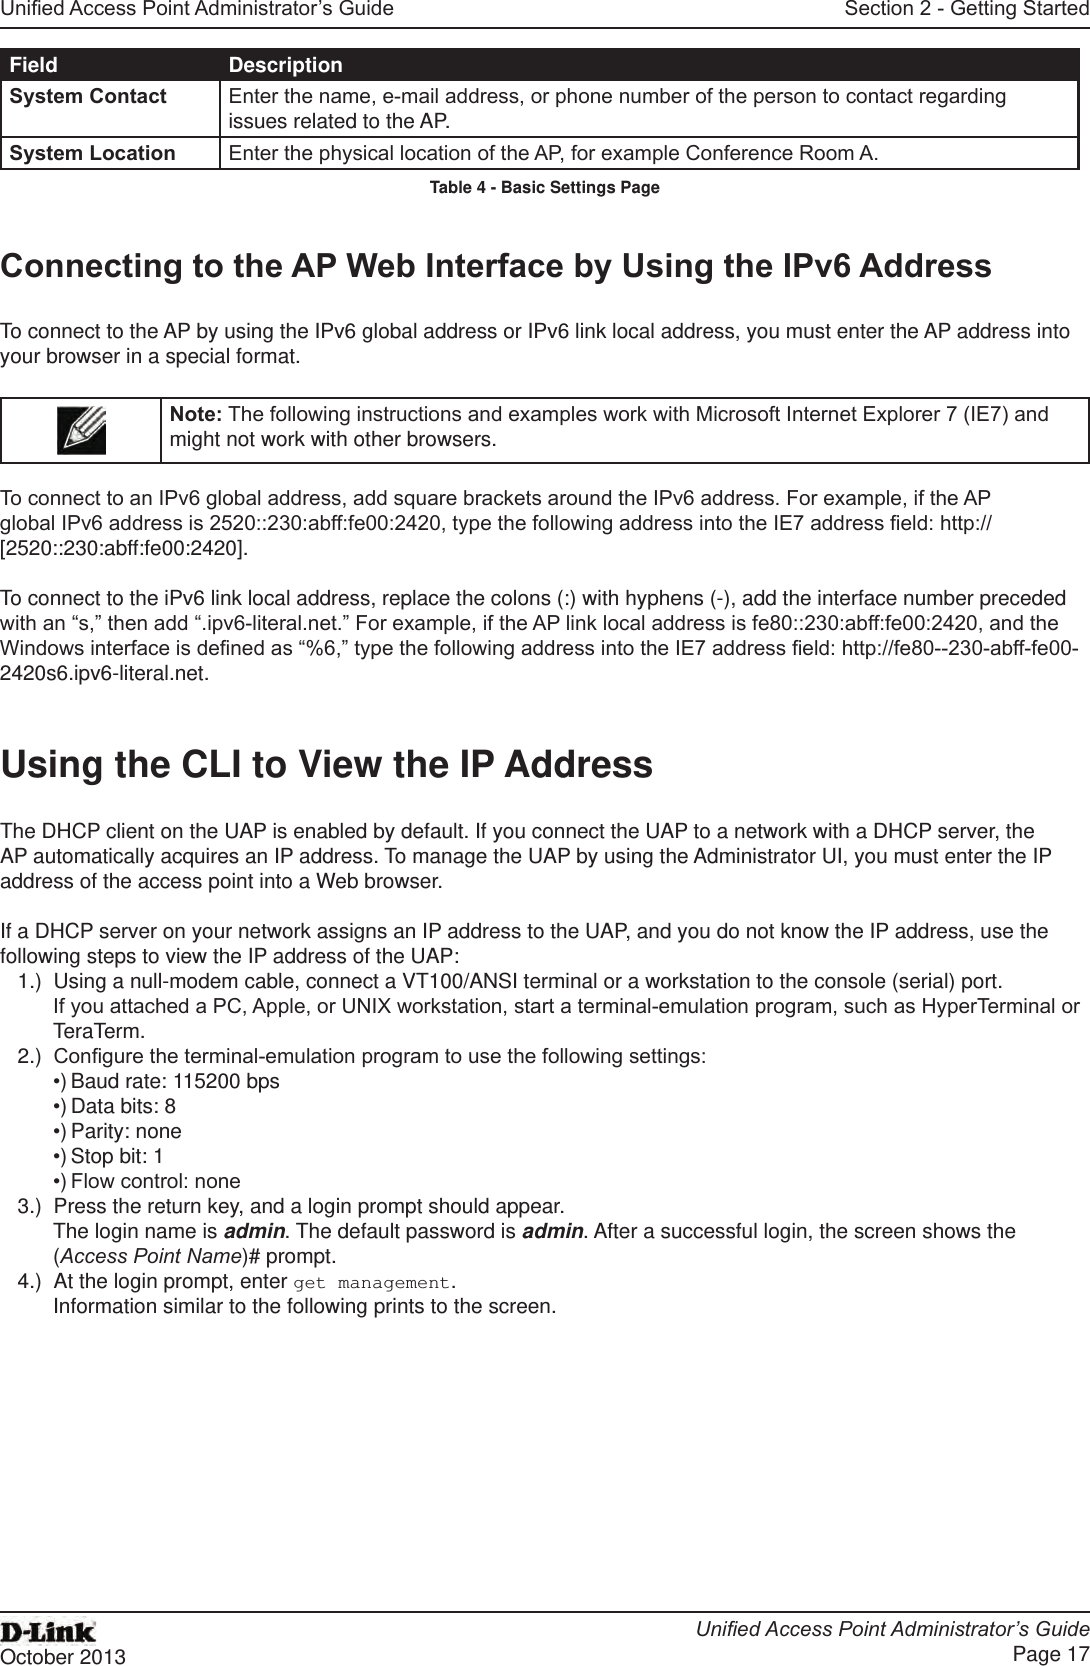 Unied Access Point Administrator’s GuideUnied Access Point Administrator’s GuidePage 17October 2013Section 2 - Getting StartedField DescriptionSystem Contact Enter the name, e-mail address, or phone number of the person to contact regarding issues related to the AP.System Location Enter the physical location of the AP, for example Conference Room A.Table 4 - Basic Settings PageConnecting to the AP Web Interface by Using the IPv6 AddressTo connect to the AP by using the IPv6 global address or IPv6 link local address, you must enter the AP address into your browser in a special format.Note: The following instructions and examples work with Microsoft Internet Explorer 7 (IE7) and might not work with other browsers.To connect to an IPv6 global address, add square brackets around the IPv6 address. For example, if the AP global IPv6 address is 2520::230:abff:fe00:2420, type the following address into the IE7 address eld: http://[2520::230:abff:fe00:2420].To connect to the iPv6 link local address, replace the colons (:) with hyphens (-), add the interface number preceded with an “s,” then add “.ipv6-literal.net.” For example, if the AP link local address is fe80::230:abff:fe00:2420, and the Windows interface is dened as “%6,” type the following address into the IE7 address eld: http://fe80--230-abff-fe00-2420s6.ipv6-literal.net.Using the CLI to View the IP AddressThe DHCP client on the UAP is enabled by default. If you connect the UAP to a network with a DHCP server, the AP automatically acquires an IP address. To manage the UAP by using the Administrator UI, you must enter the IP address of the access point into a Web browser. If a DHCP server on your network assigns an IP address to the UAP, and you do not know the IP address, use the following steps to view the IP address of the UAP:1.)  Using a null-modem cable, connect a VT100/ANSI terminal or a workstation to the console (serial) port.If you attached a PC, Apple, or UNIX workstation, start a terminal-emulation program, such as HyperTerminal or TeraTerm.2.)  Congure the terminal-emulation program to use the following settings:•) Baud rate: 115200 bps•) Data bits: 8•) Parity: none•) Stop bit: 1•) Flow control: none3.)  Press the return key, and a login prompt should appear.The login name is admin. The default password is admin. After a successful login, the screen shows the (Access Point Name)# prompt. 4.)  At the login prompt, enter get management.Information similar to the following prints to the screen.